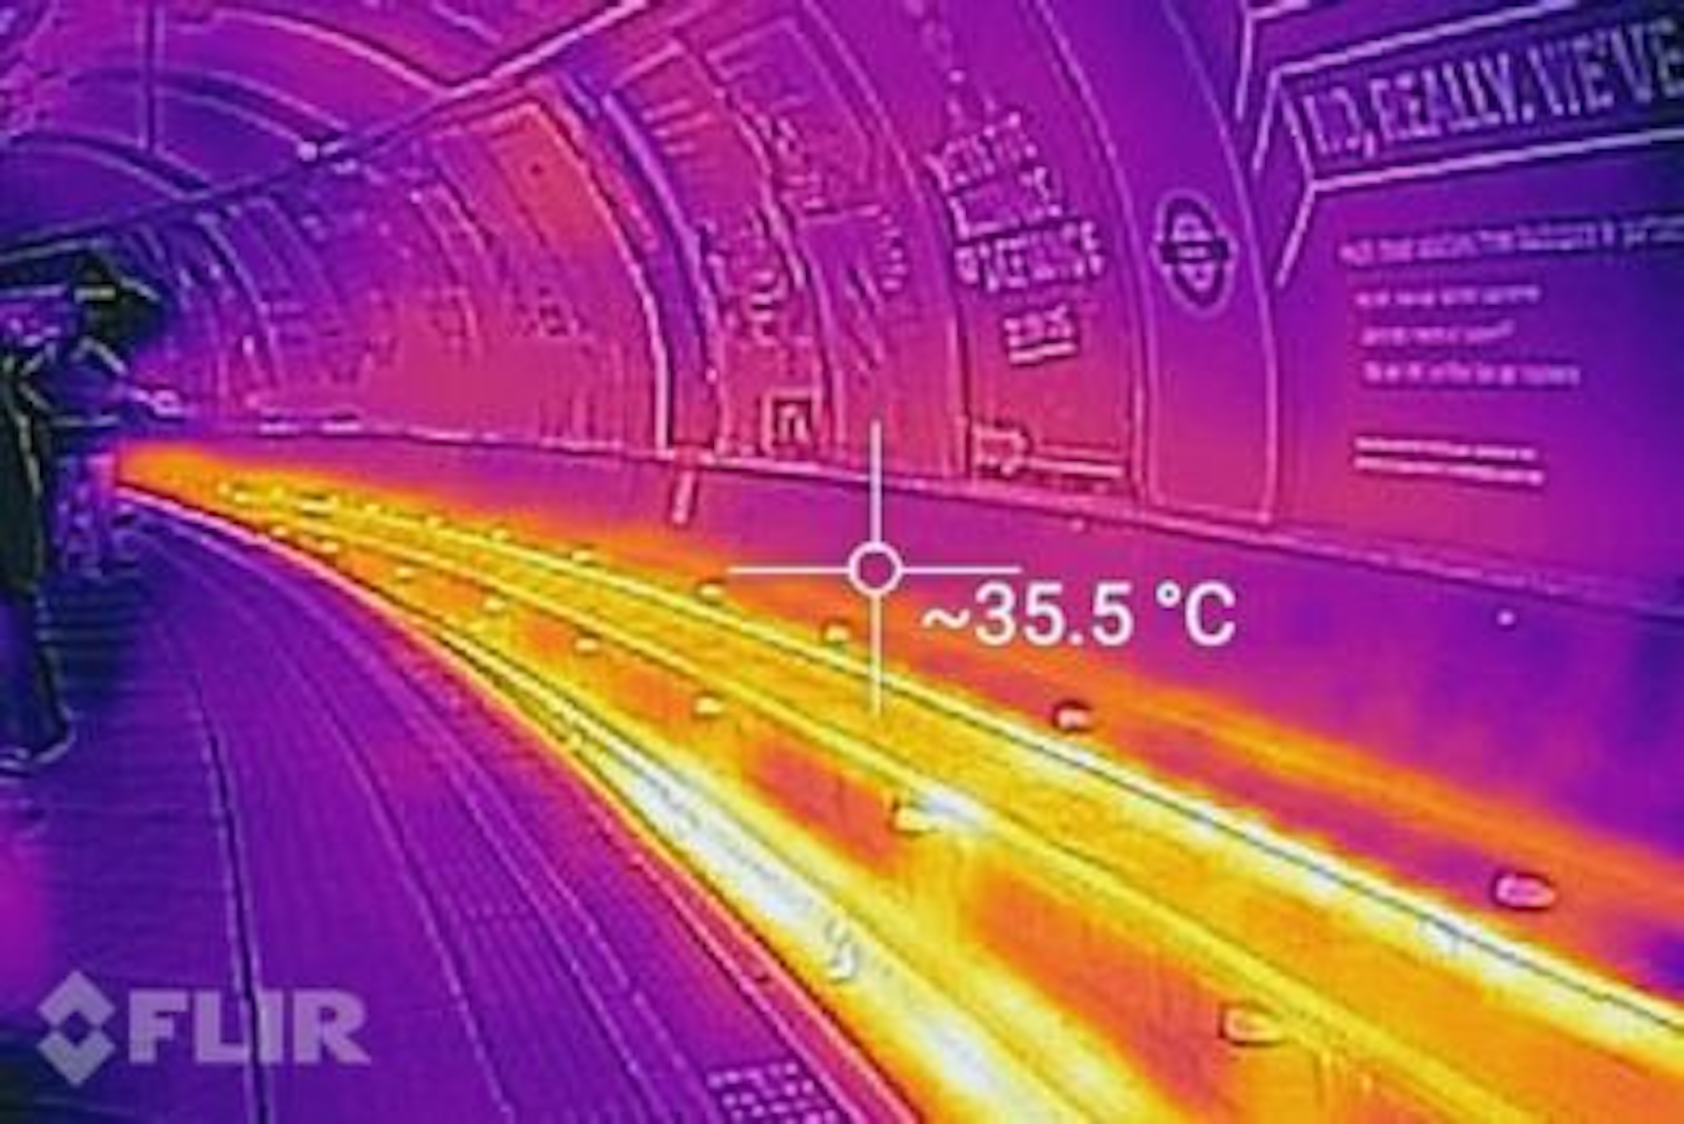 Thermal Camera Captures Images In London Tube On Record Temperature Day